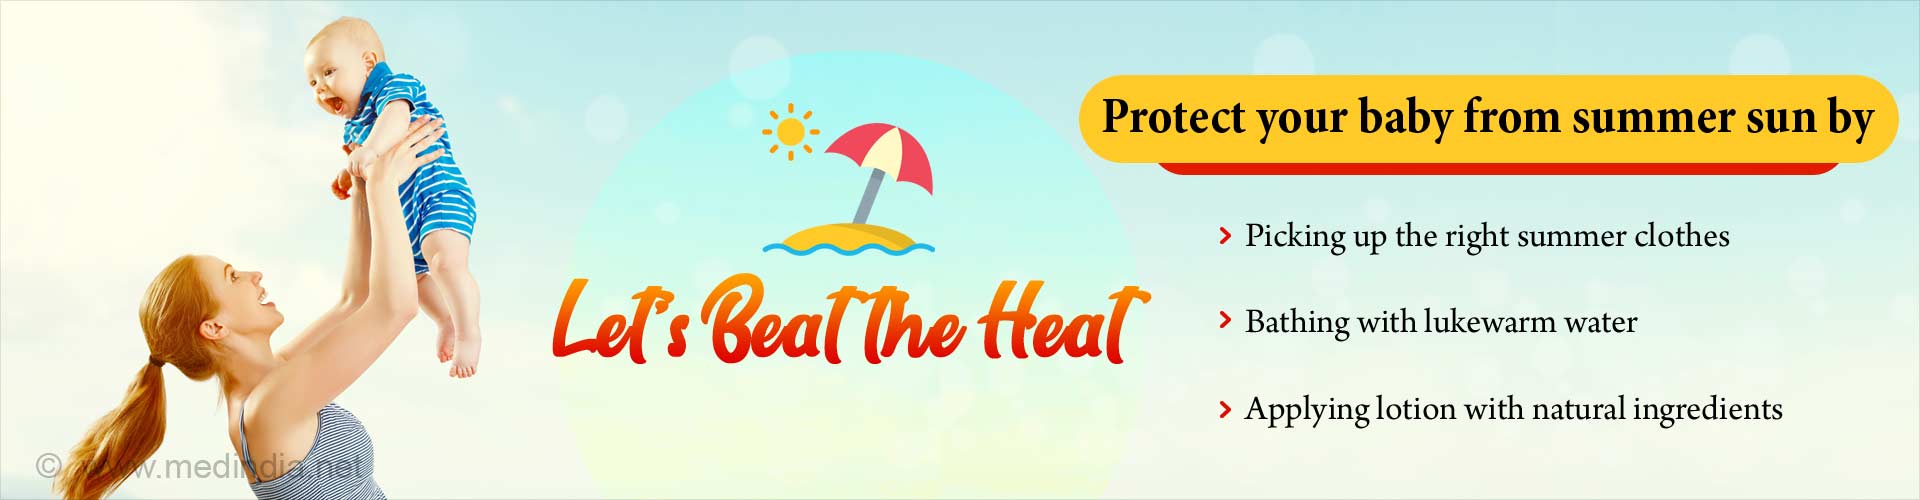 Let's beat the heat. Protect your baby from summer sun by picking up the right summer clothes, bathing with lukewarm water and applying lotion with natural ingredients.